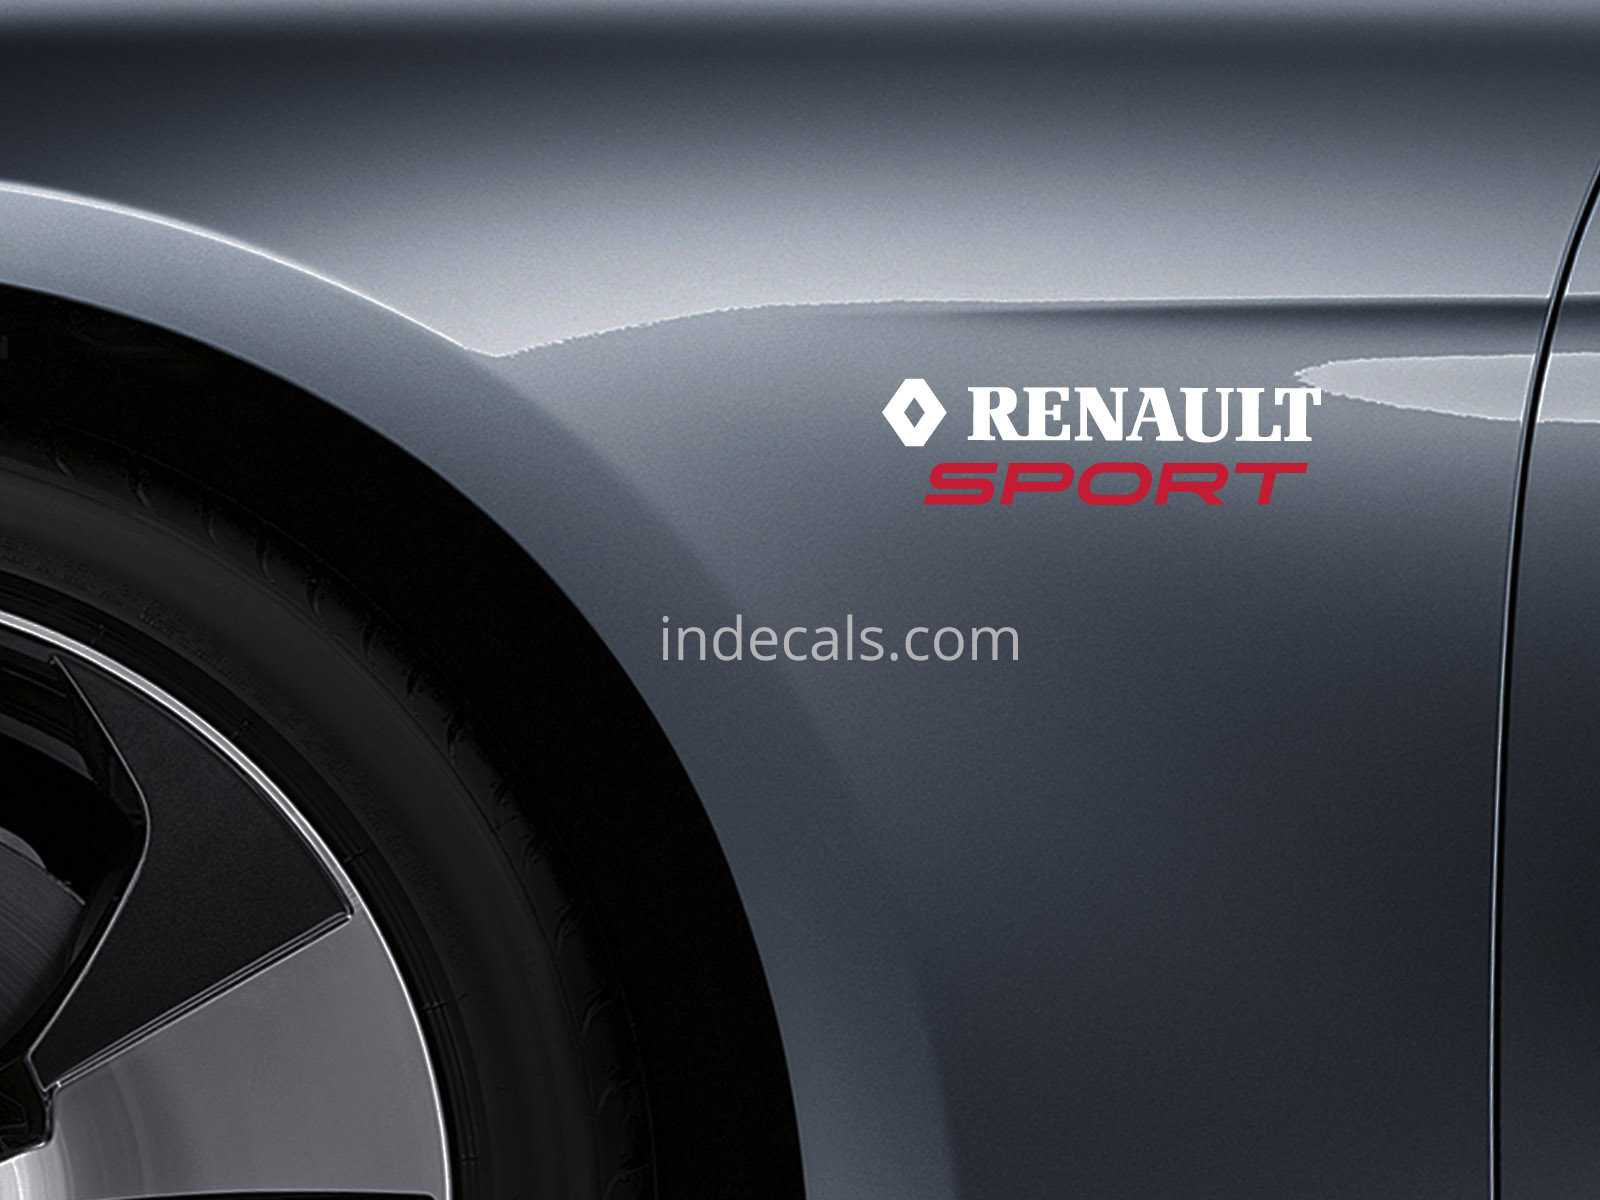 2 x Renault Sports Stickers for Wings - White & Red